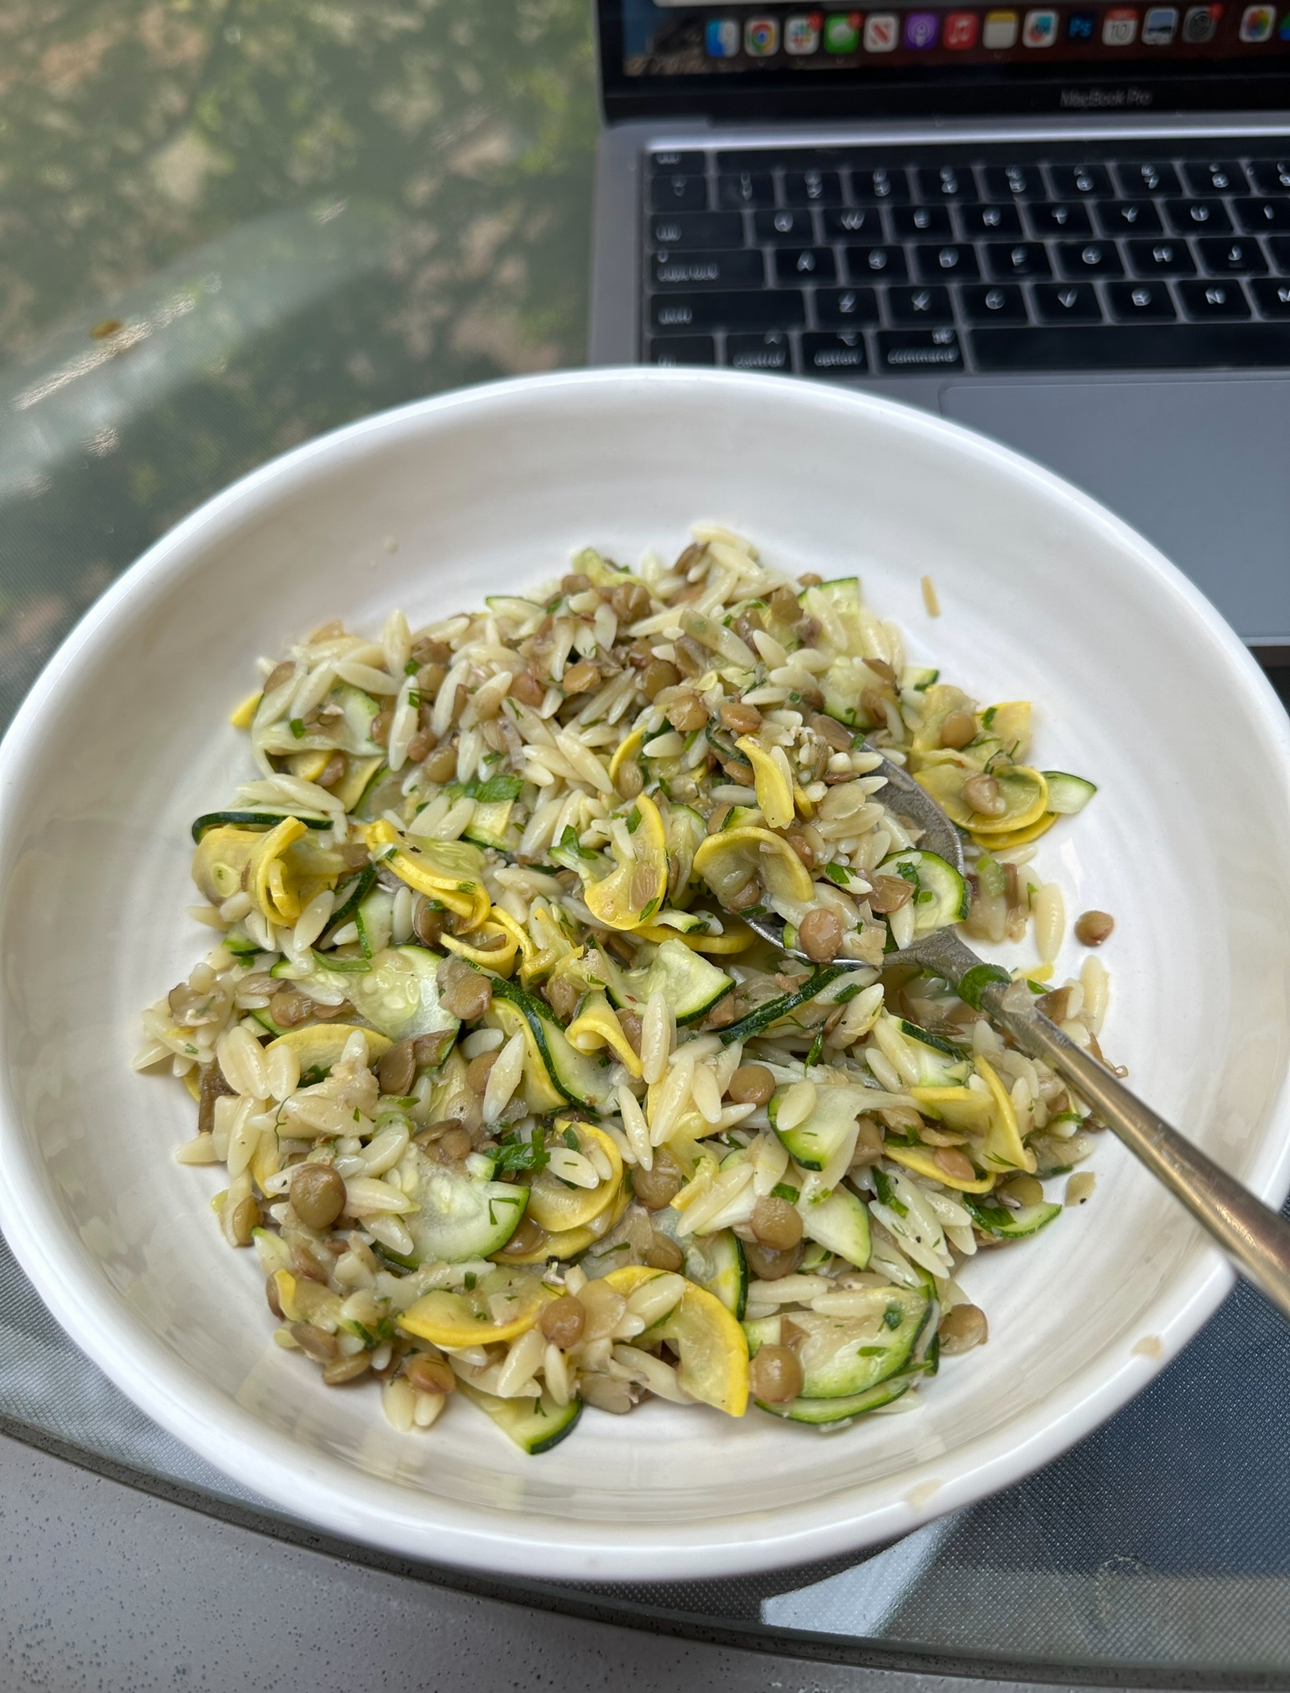 A bowl of zucchini and grain salad with a fork, placed on a table with a laptop in the background